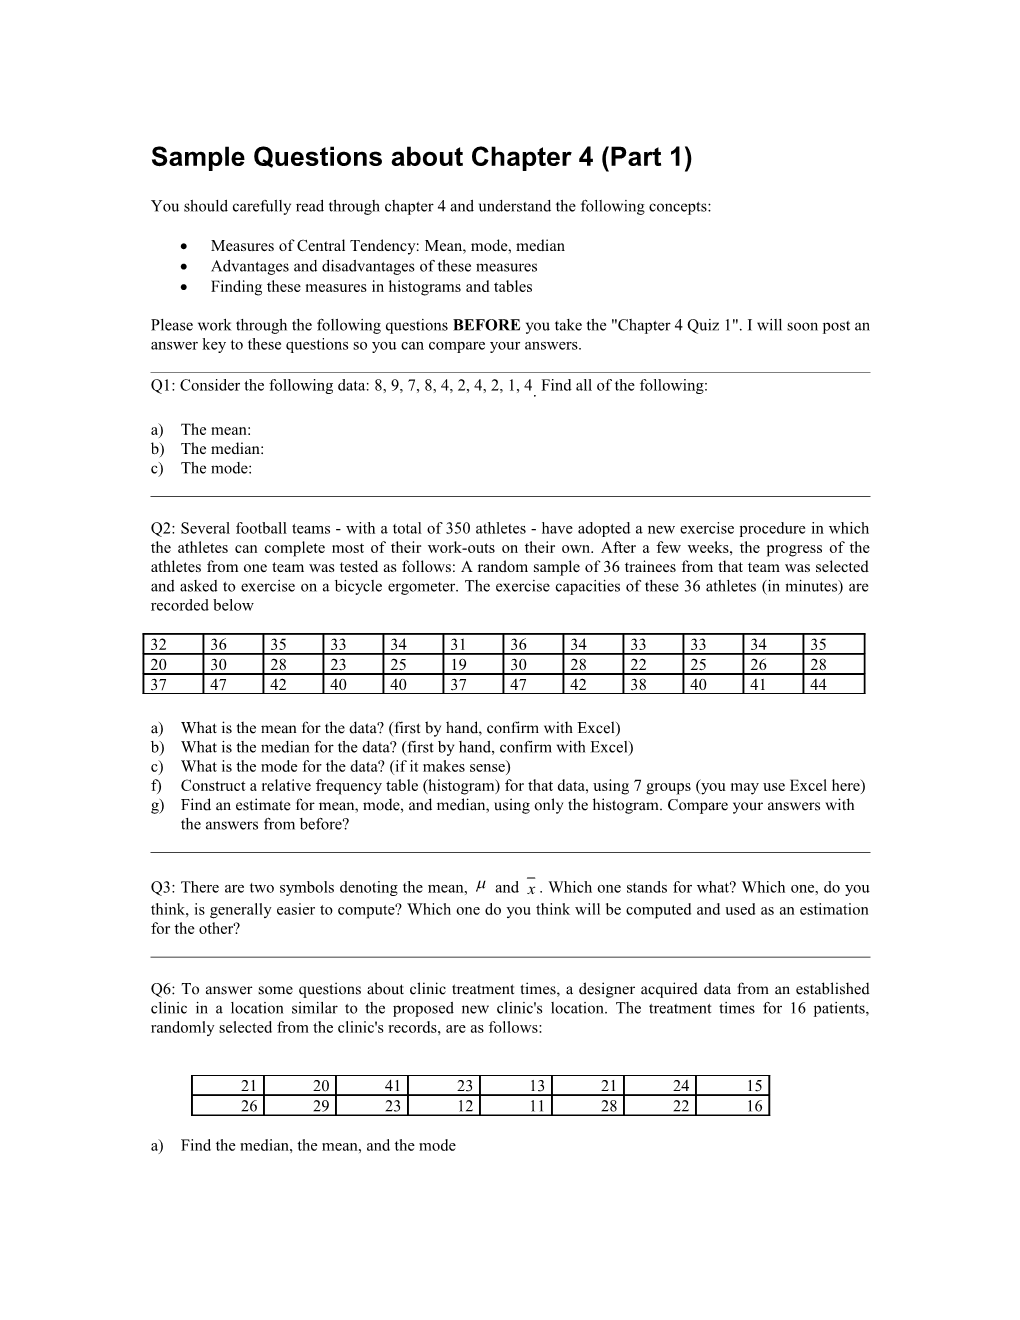 Sample Questions About Chapter 4